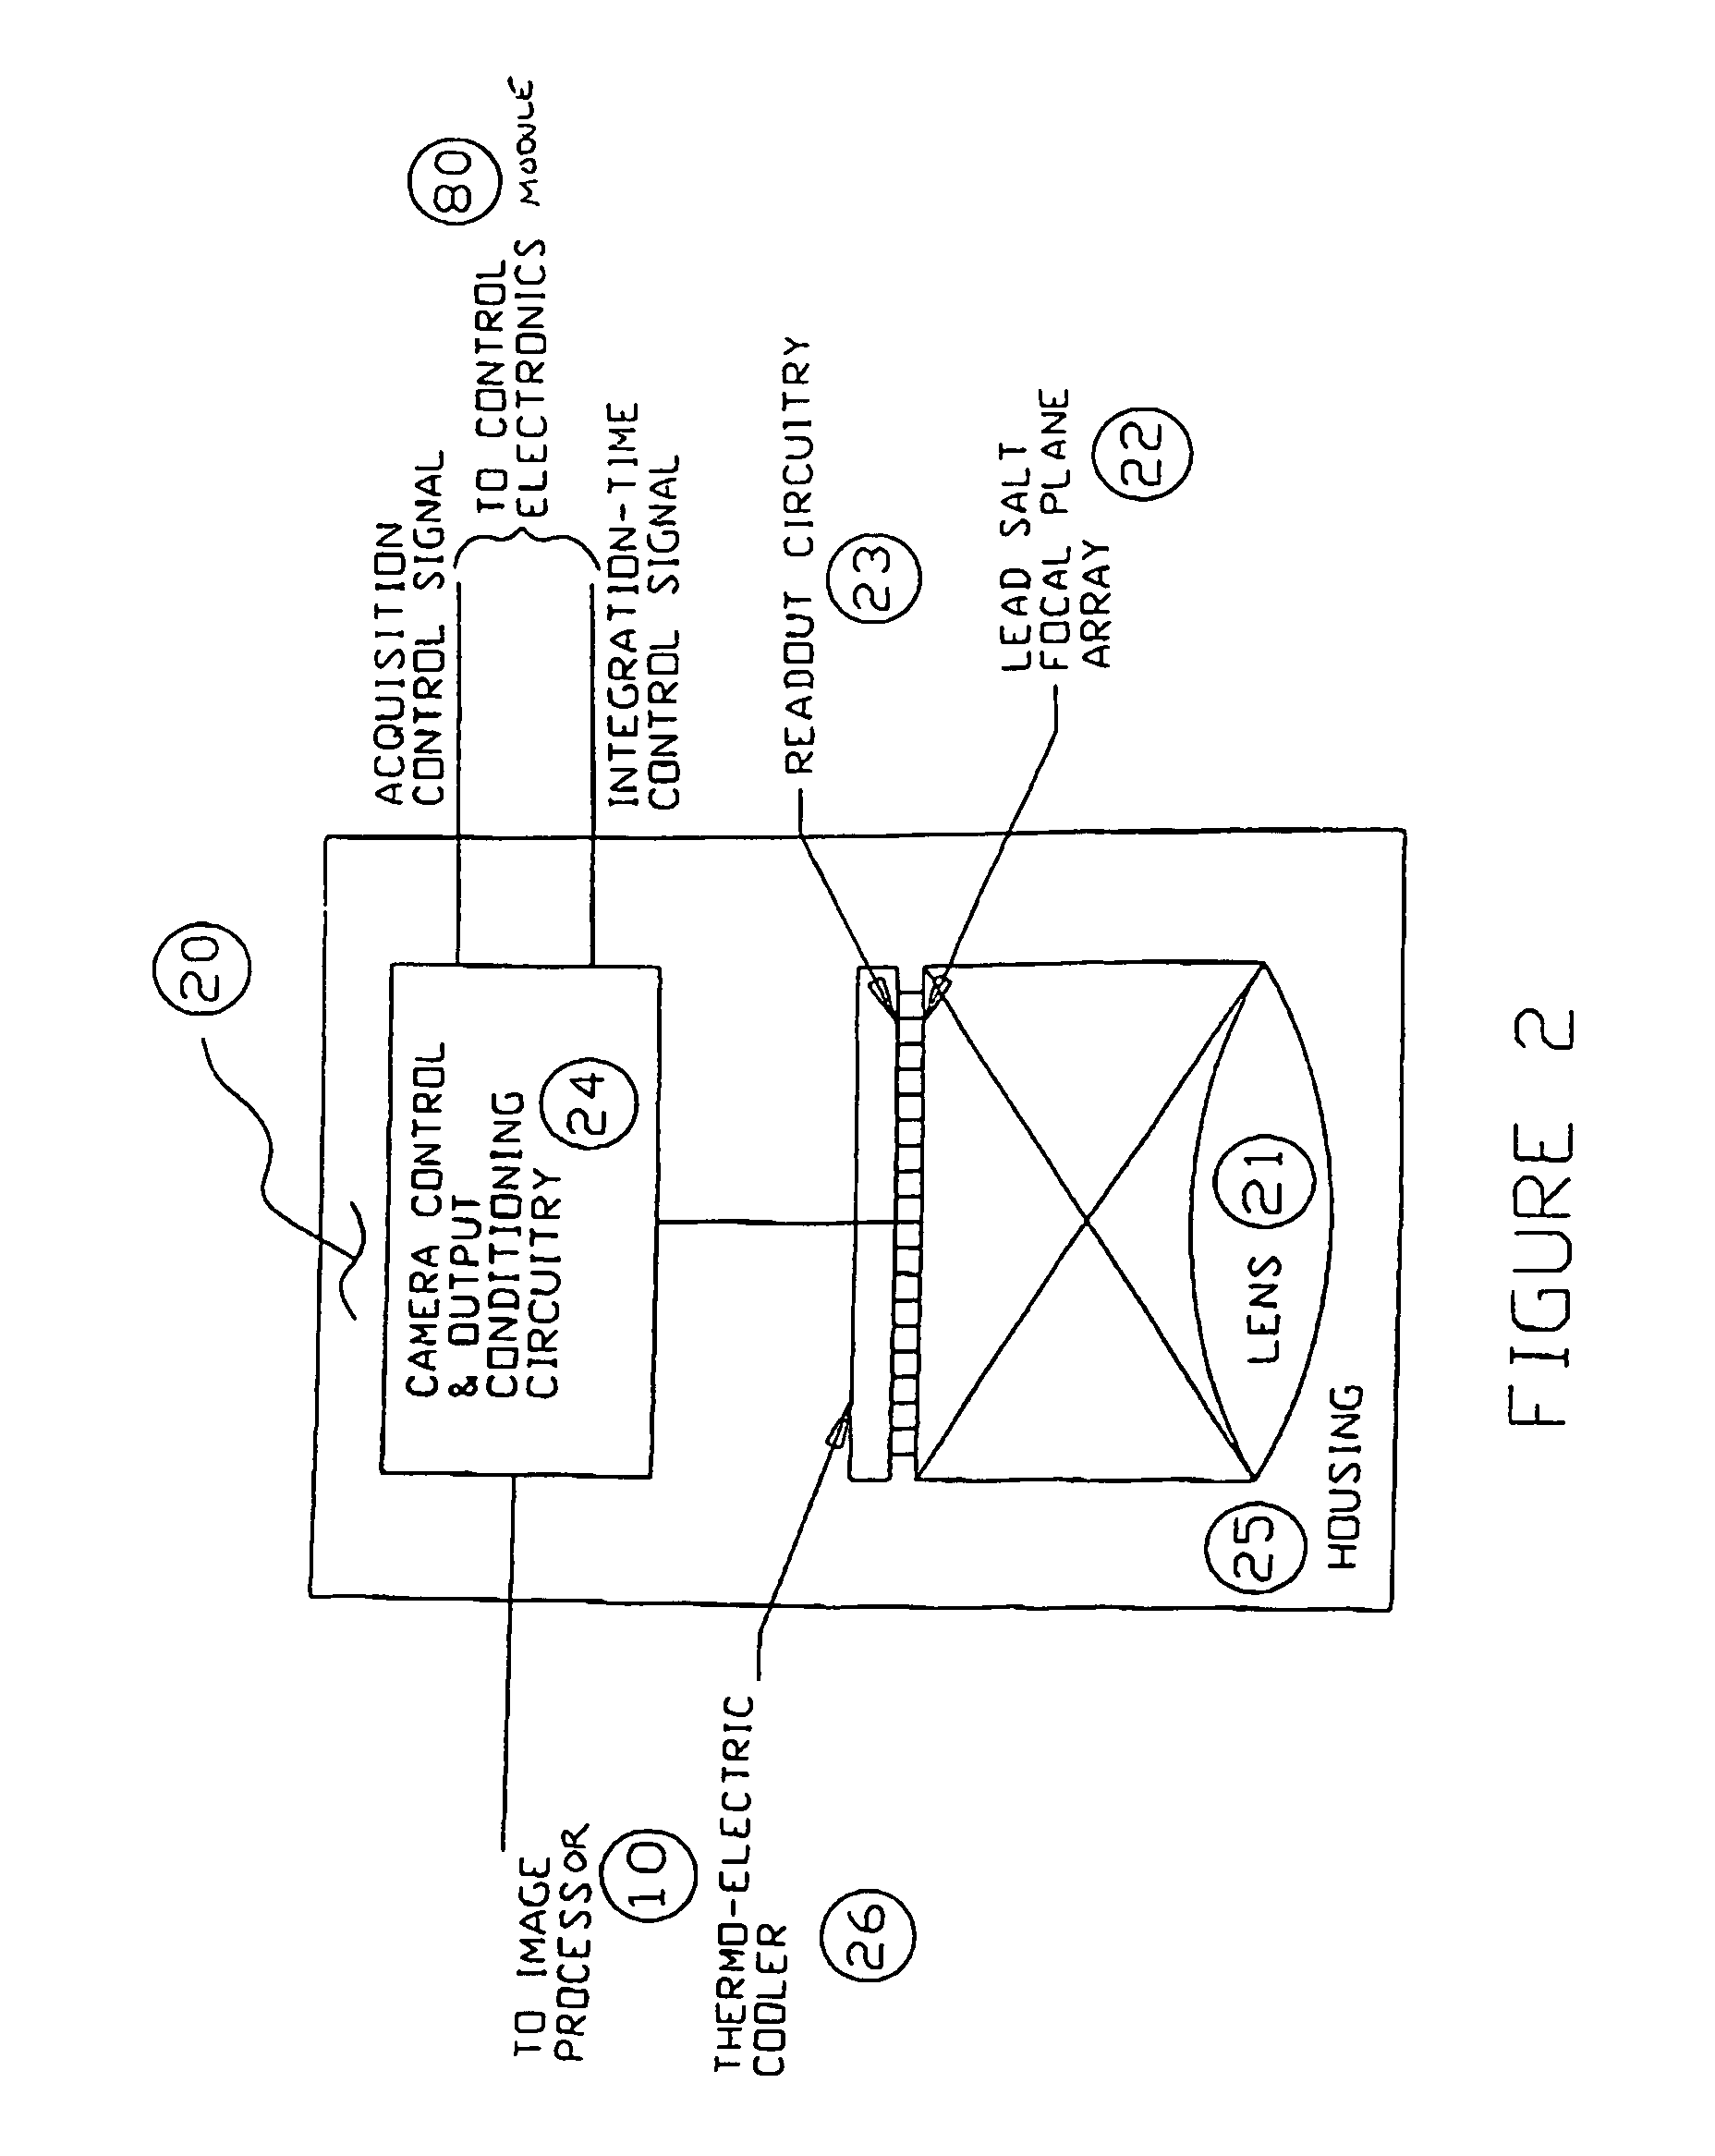 Apparatus and method for providing snapshot action thermal infrared imaging within automated process control article inspection applications